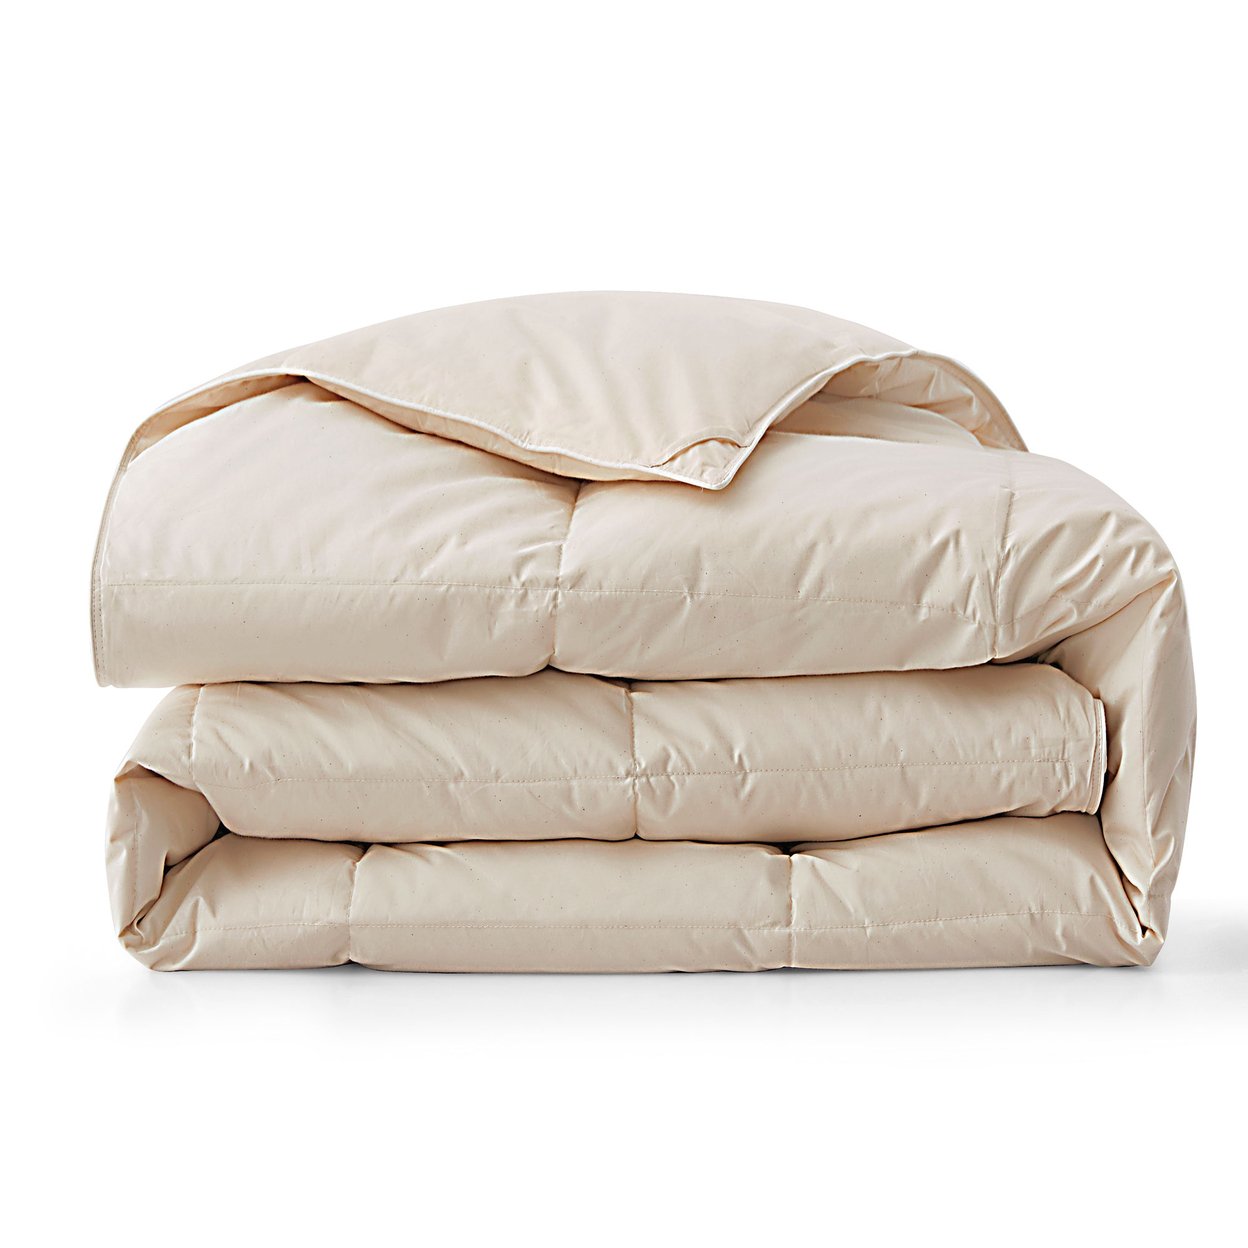 Pure Comfort & Luxury Bedding Bundle: All Season Organic Goose Down Bundle With Pillow-in-Pillow Design Goose Down Pillows And Flax Linen Du